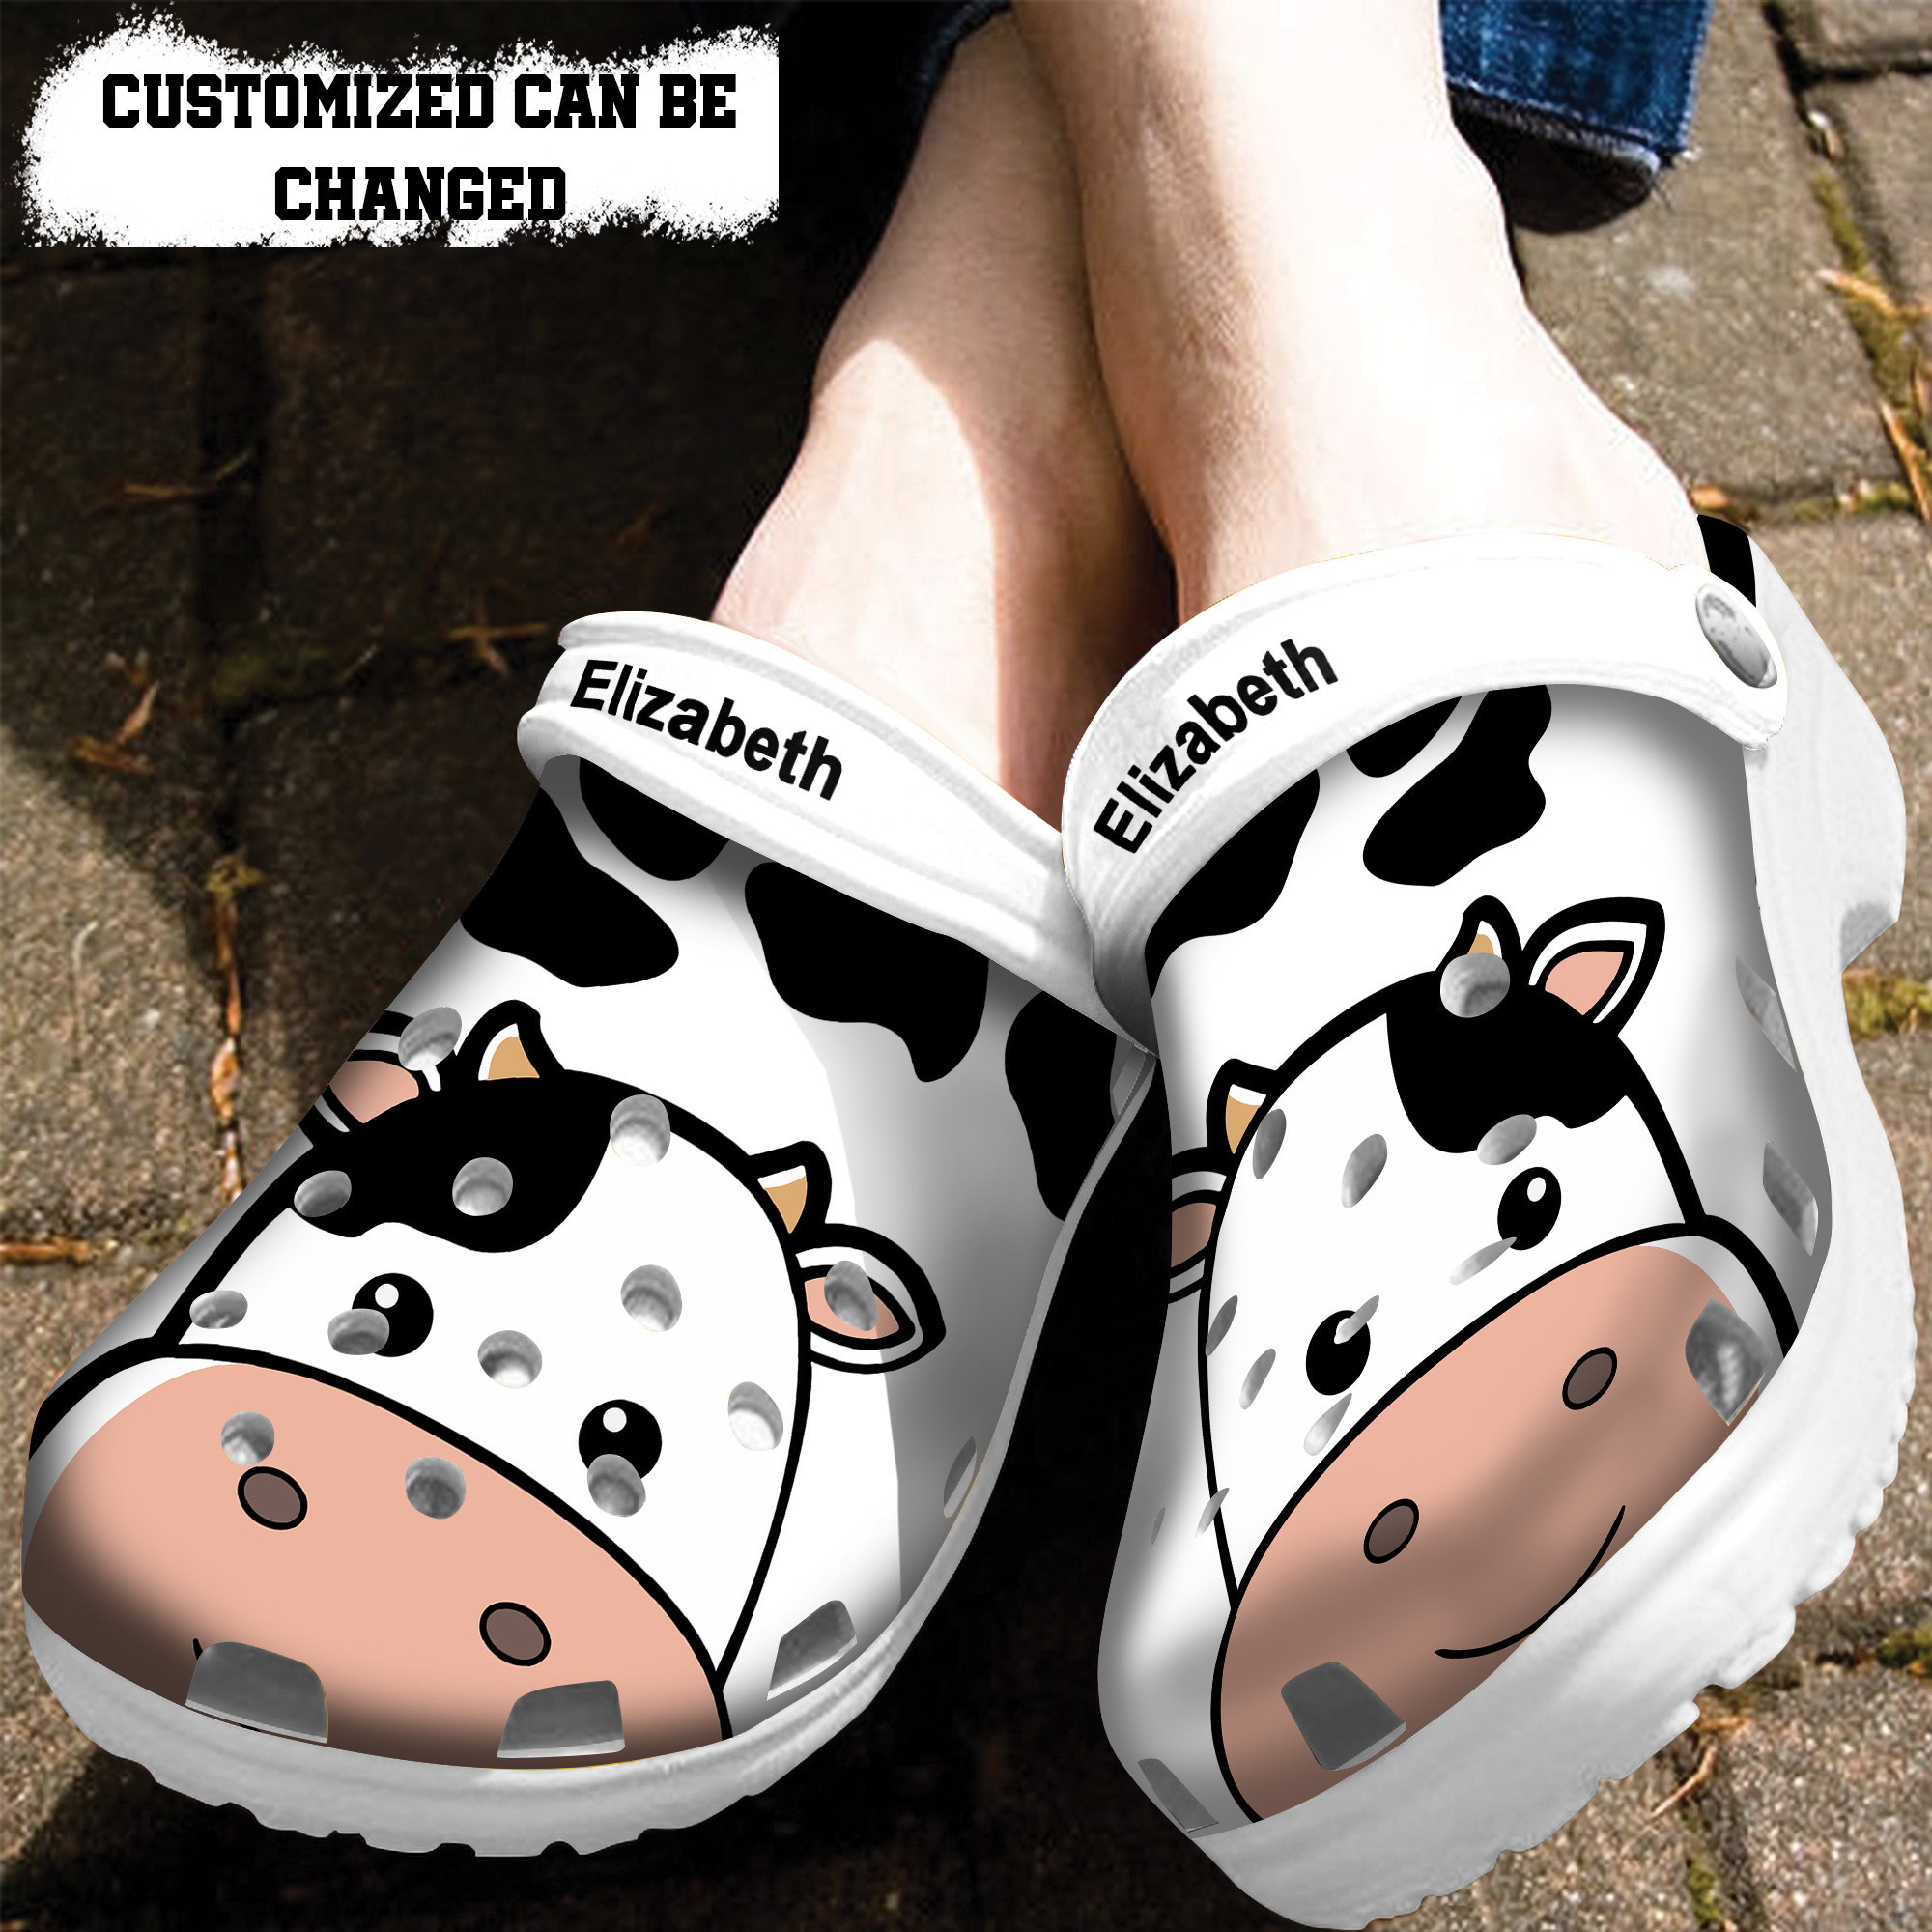 Animal Crocs Cow Face Print Personalized Clogs Shoes With Your Name ...